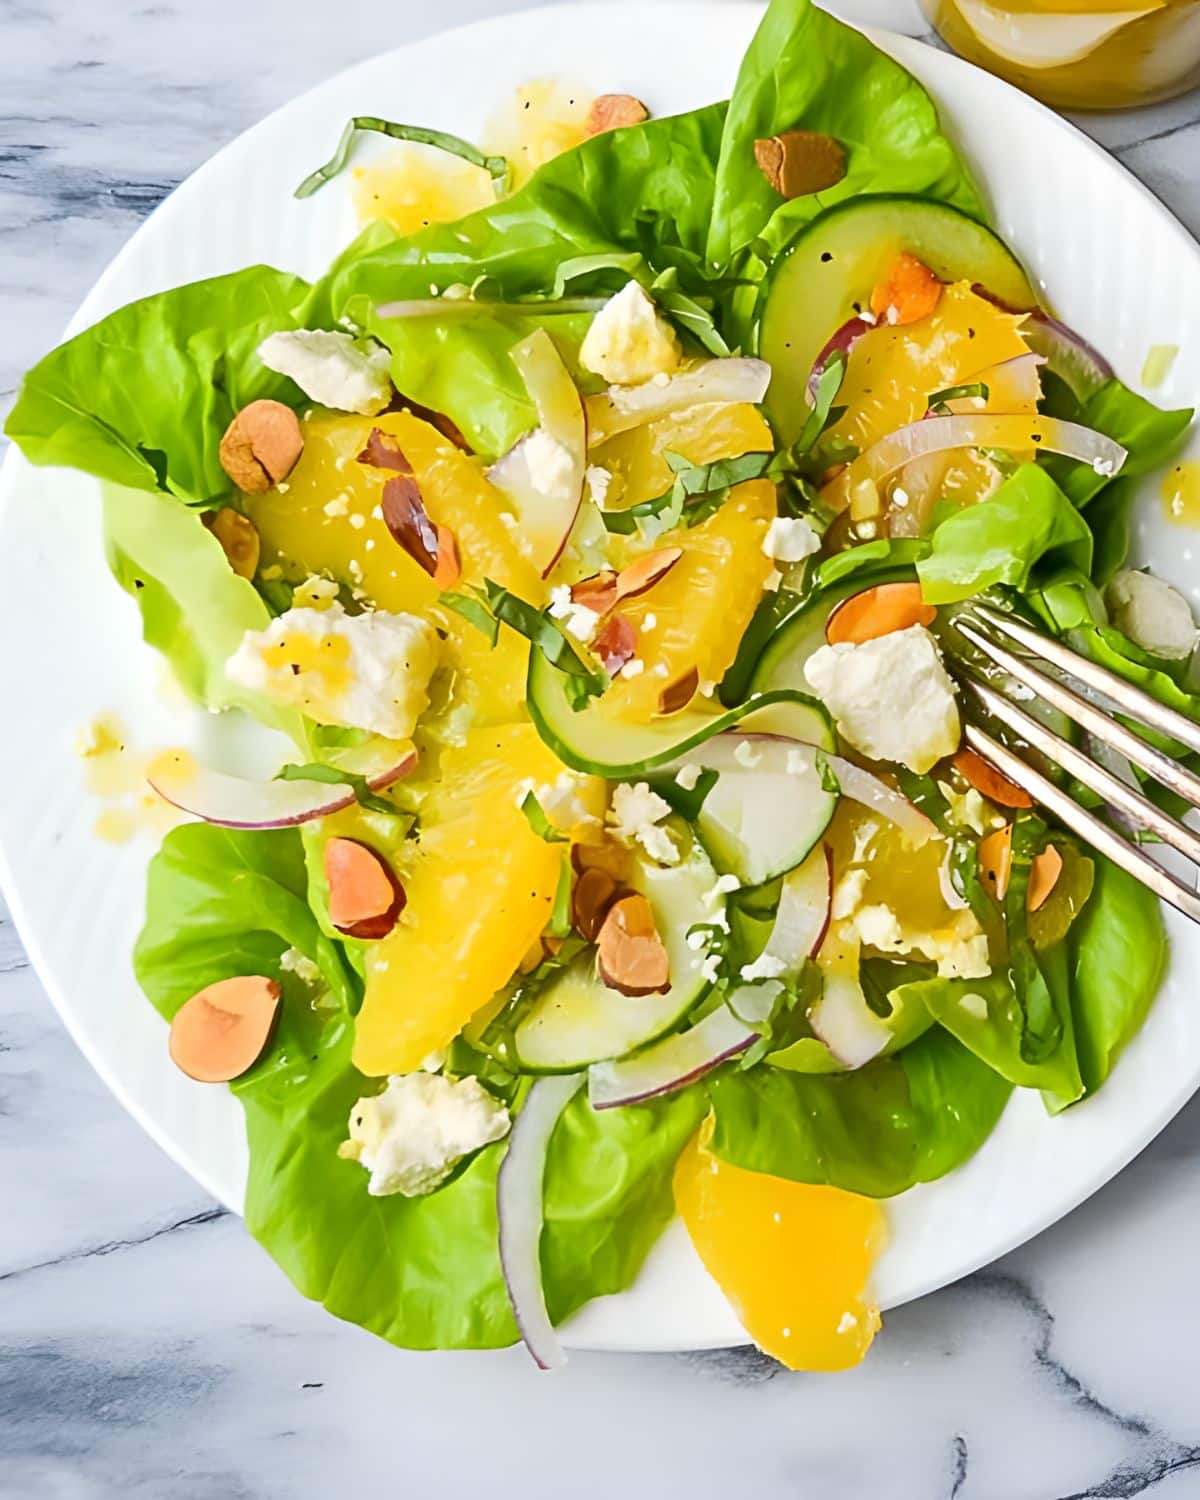 Serving the citrus and almond salad.